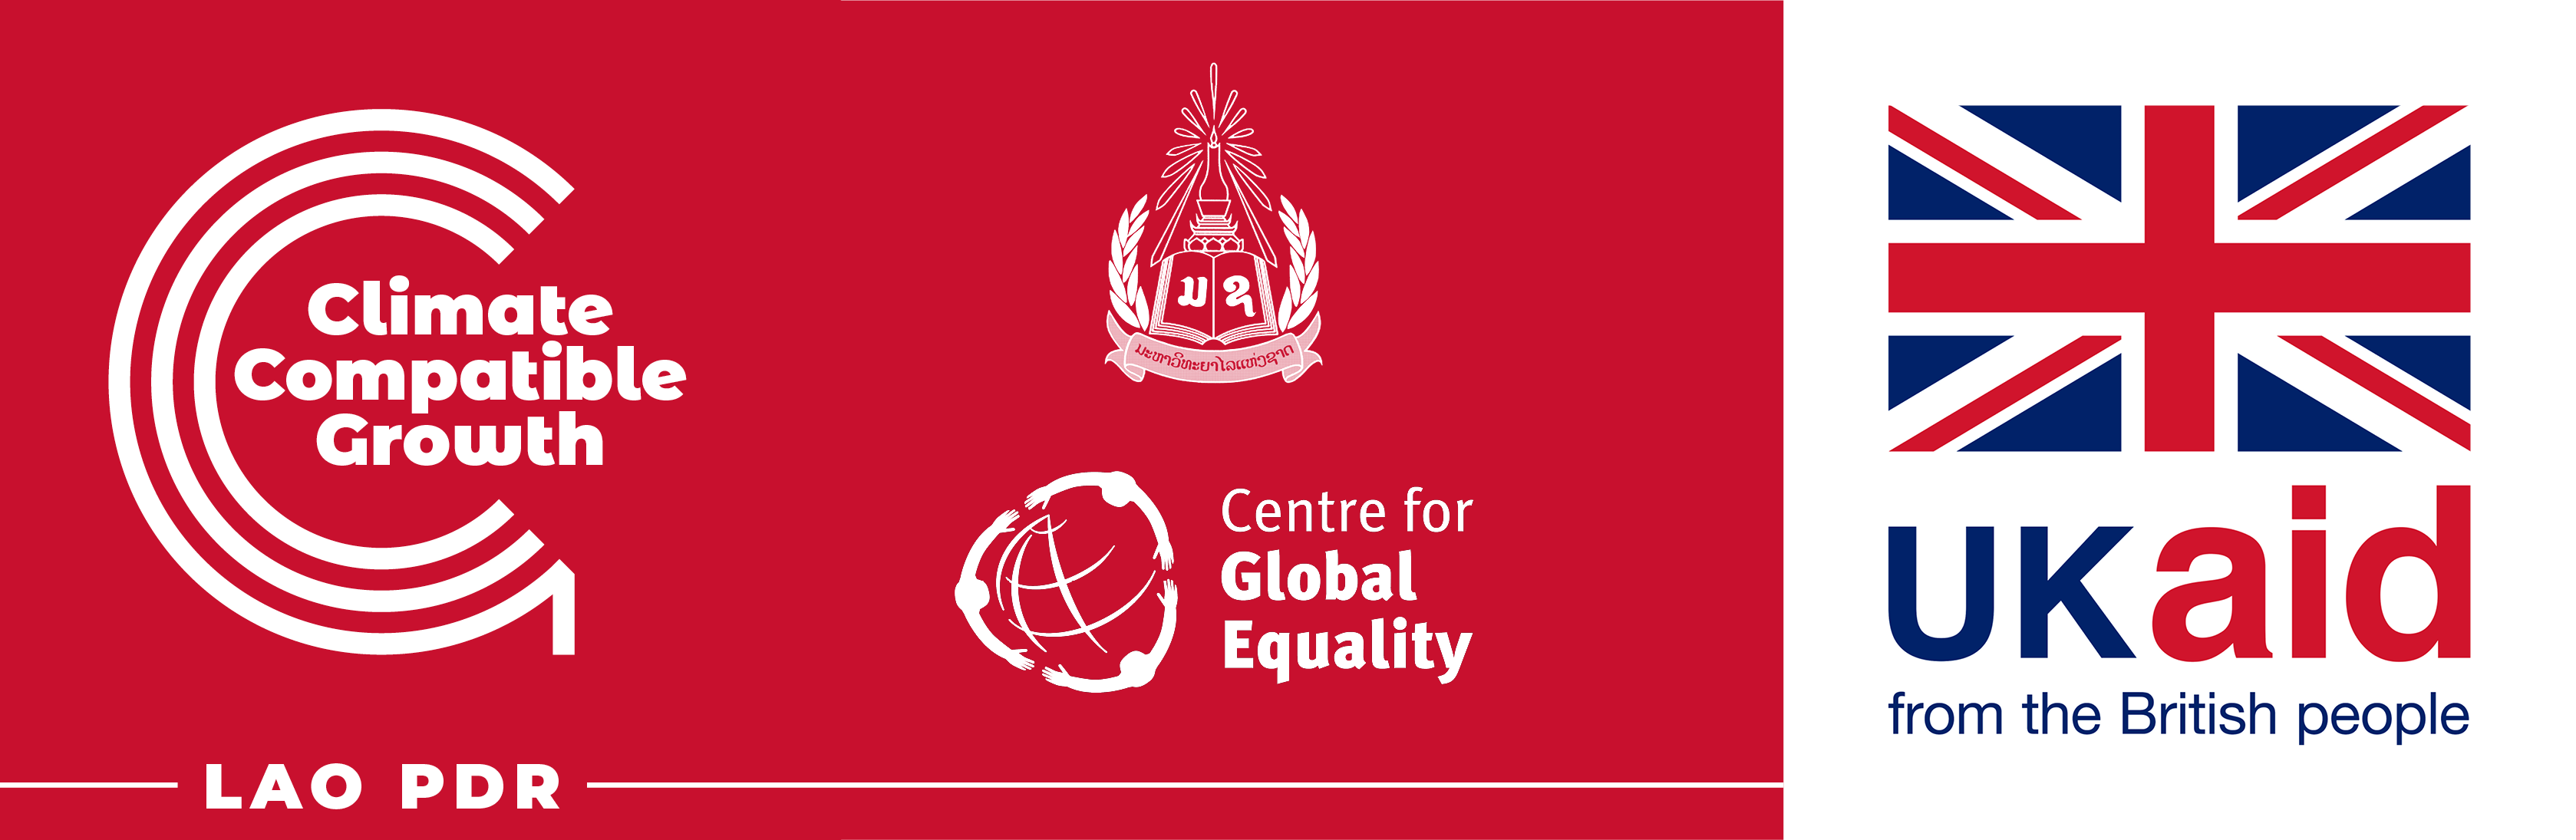 The CCG Kenya Network logo including the logos of CCG, the Centre for Global Equality, and Strathmore University, Nairobi